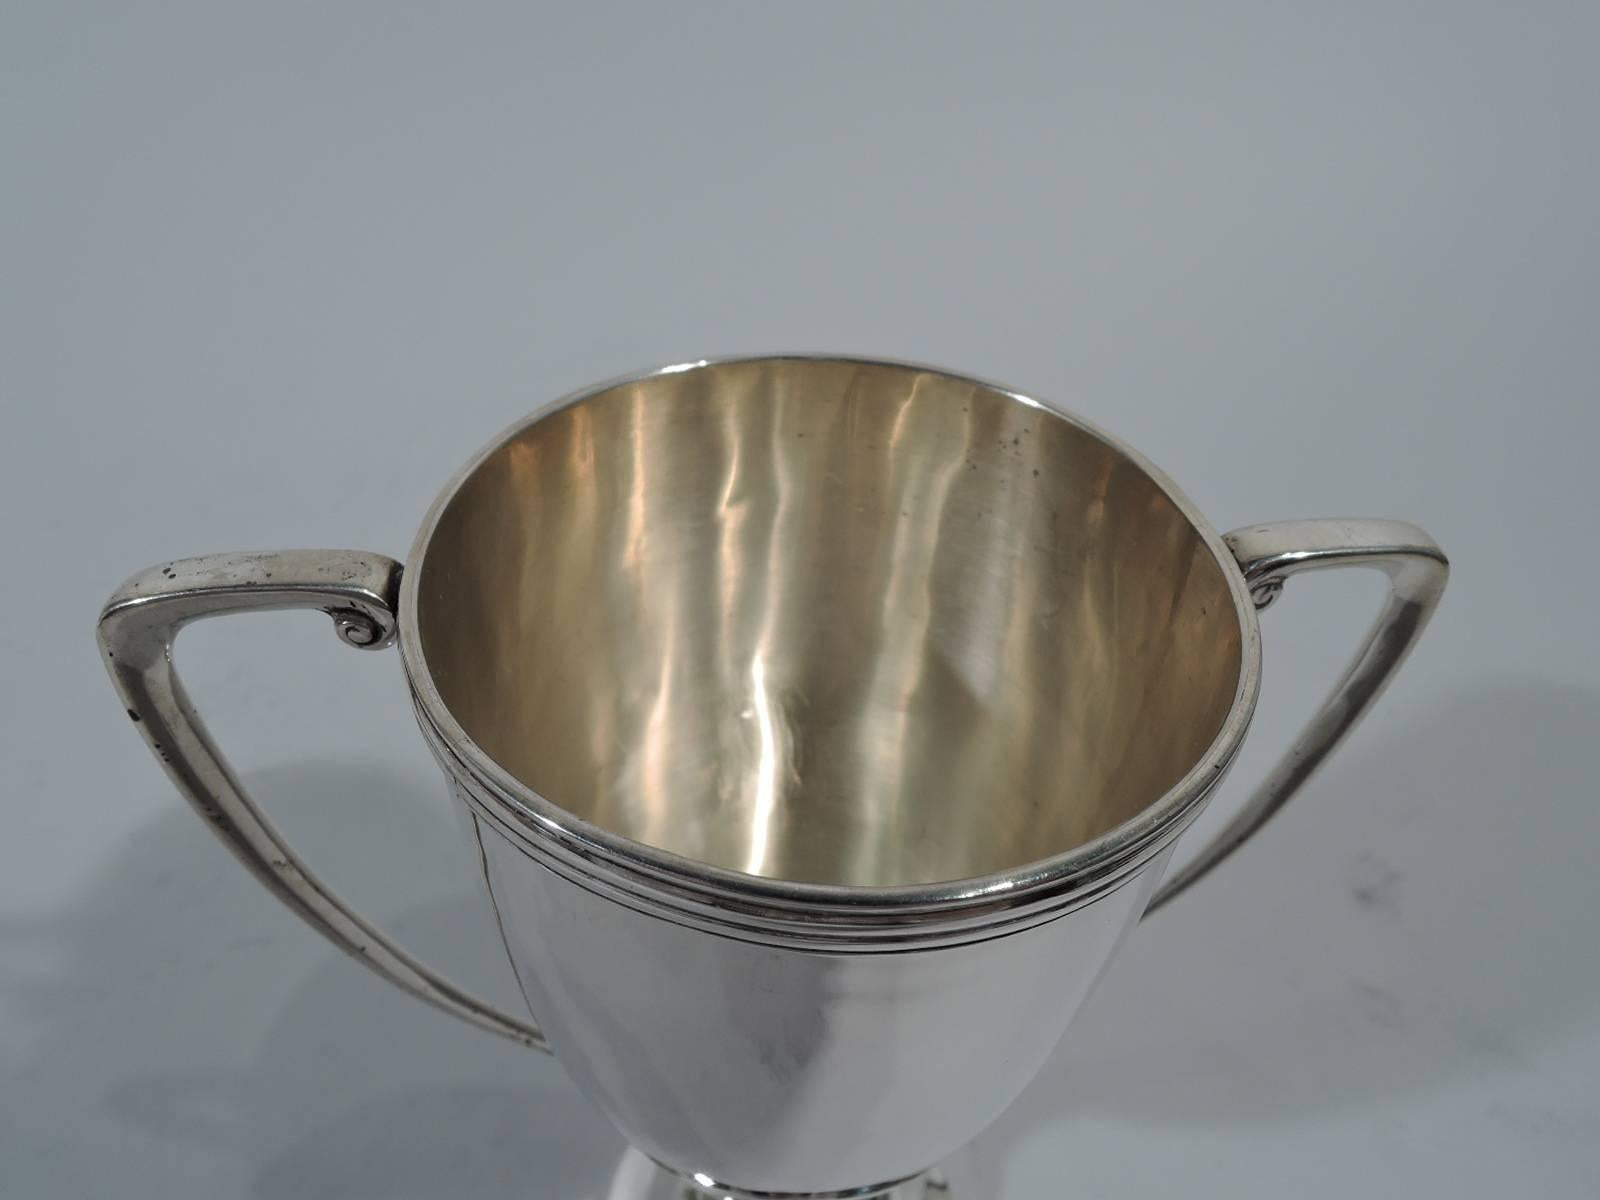 Classic silver trophy cup. Made by Hamilton & Co. in Calcutta. Tall and narrow bowl with reeded rim. Domed foot. Scrolled-bracket handles with volute scrolls. Traditional form gracefully rendered in small-scale. Hallmarked. Weight: 4.5 troy ounces.